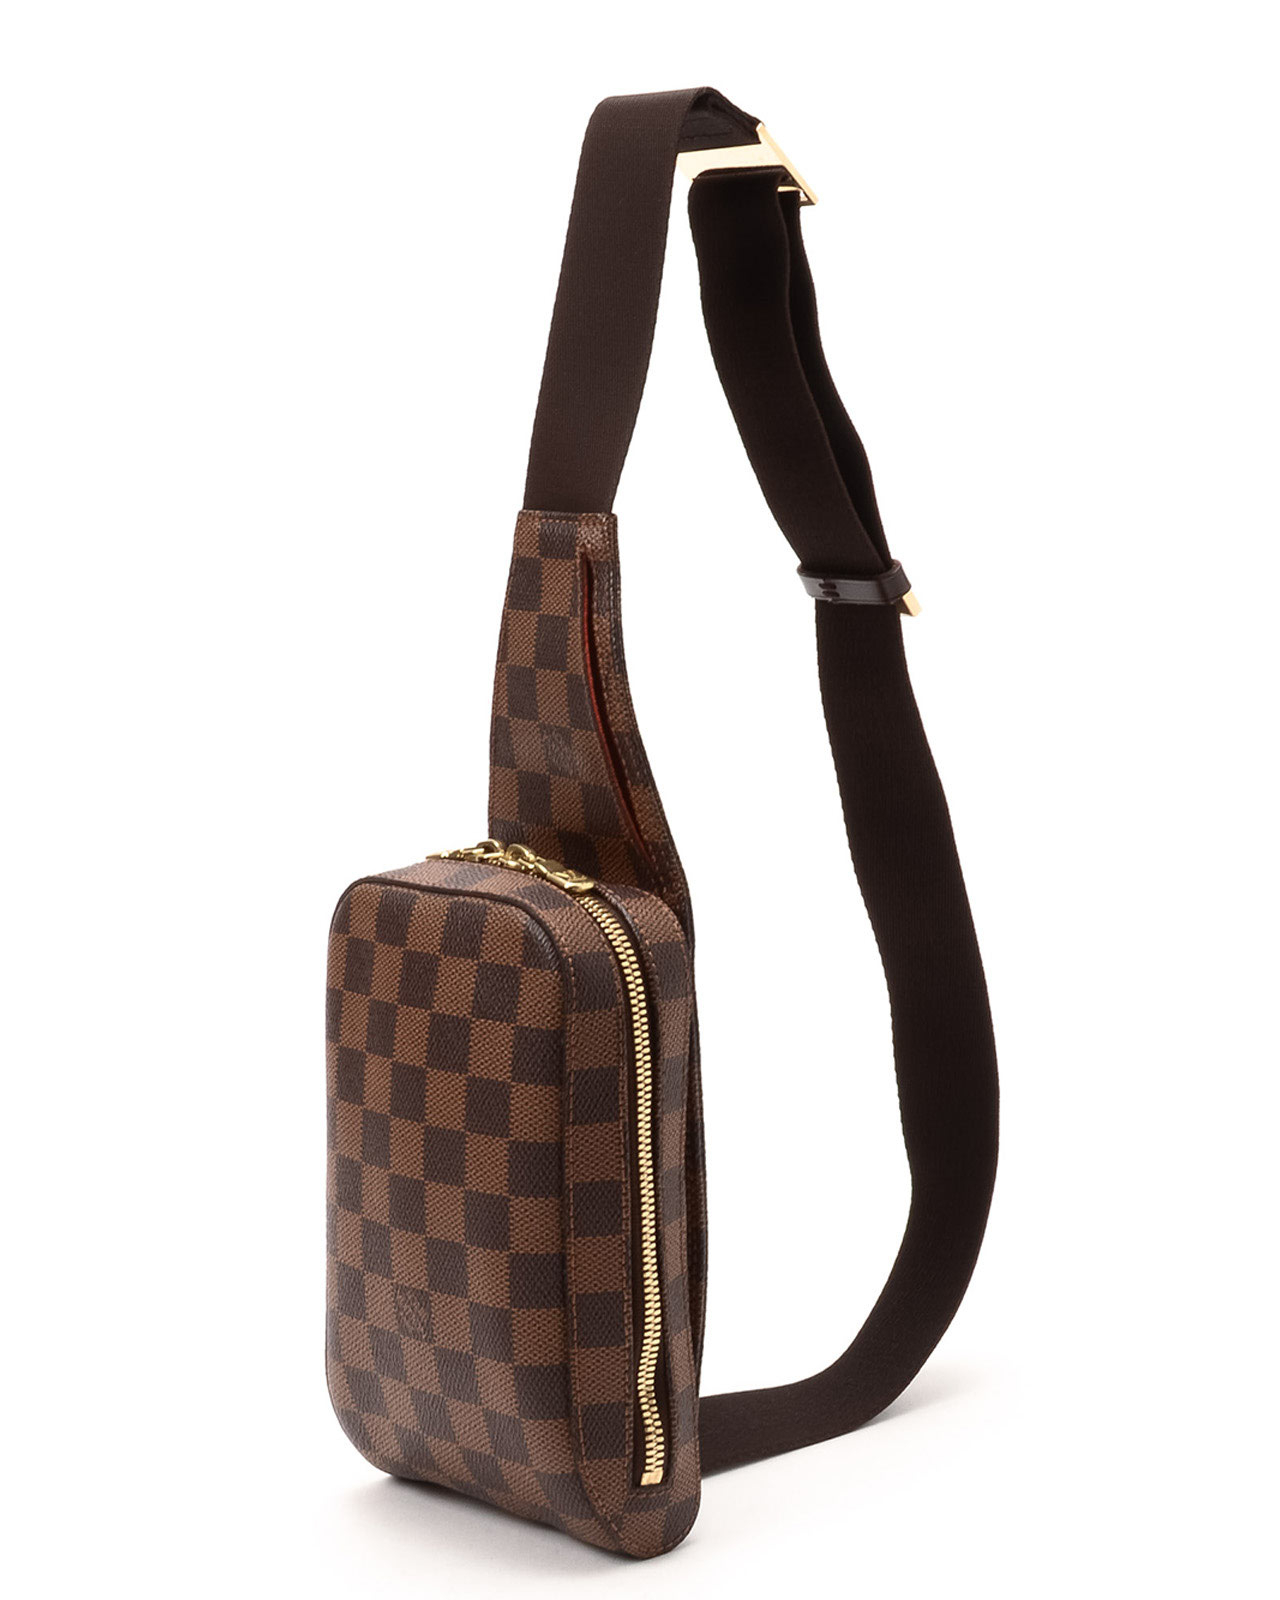 Louis Vuitton Bag Damier Ebene | Confederated Tribes of the Umatilla Indian Reservation